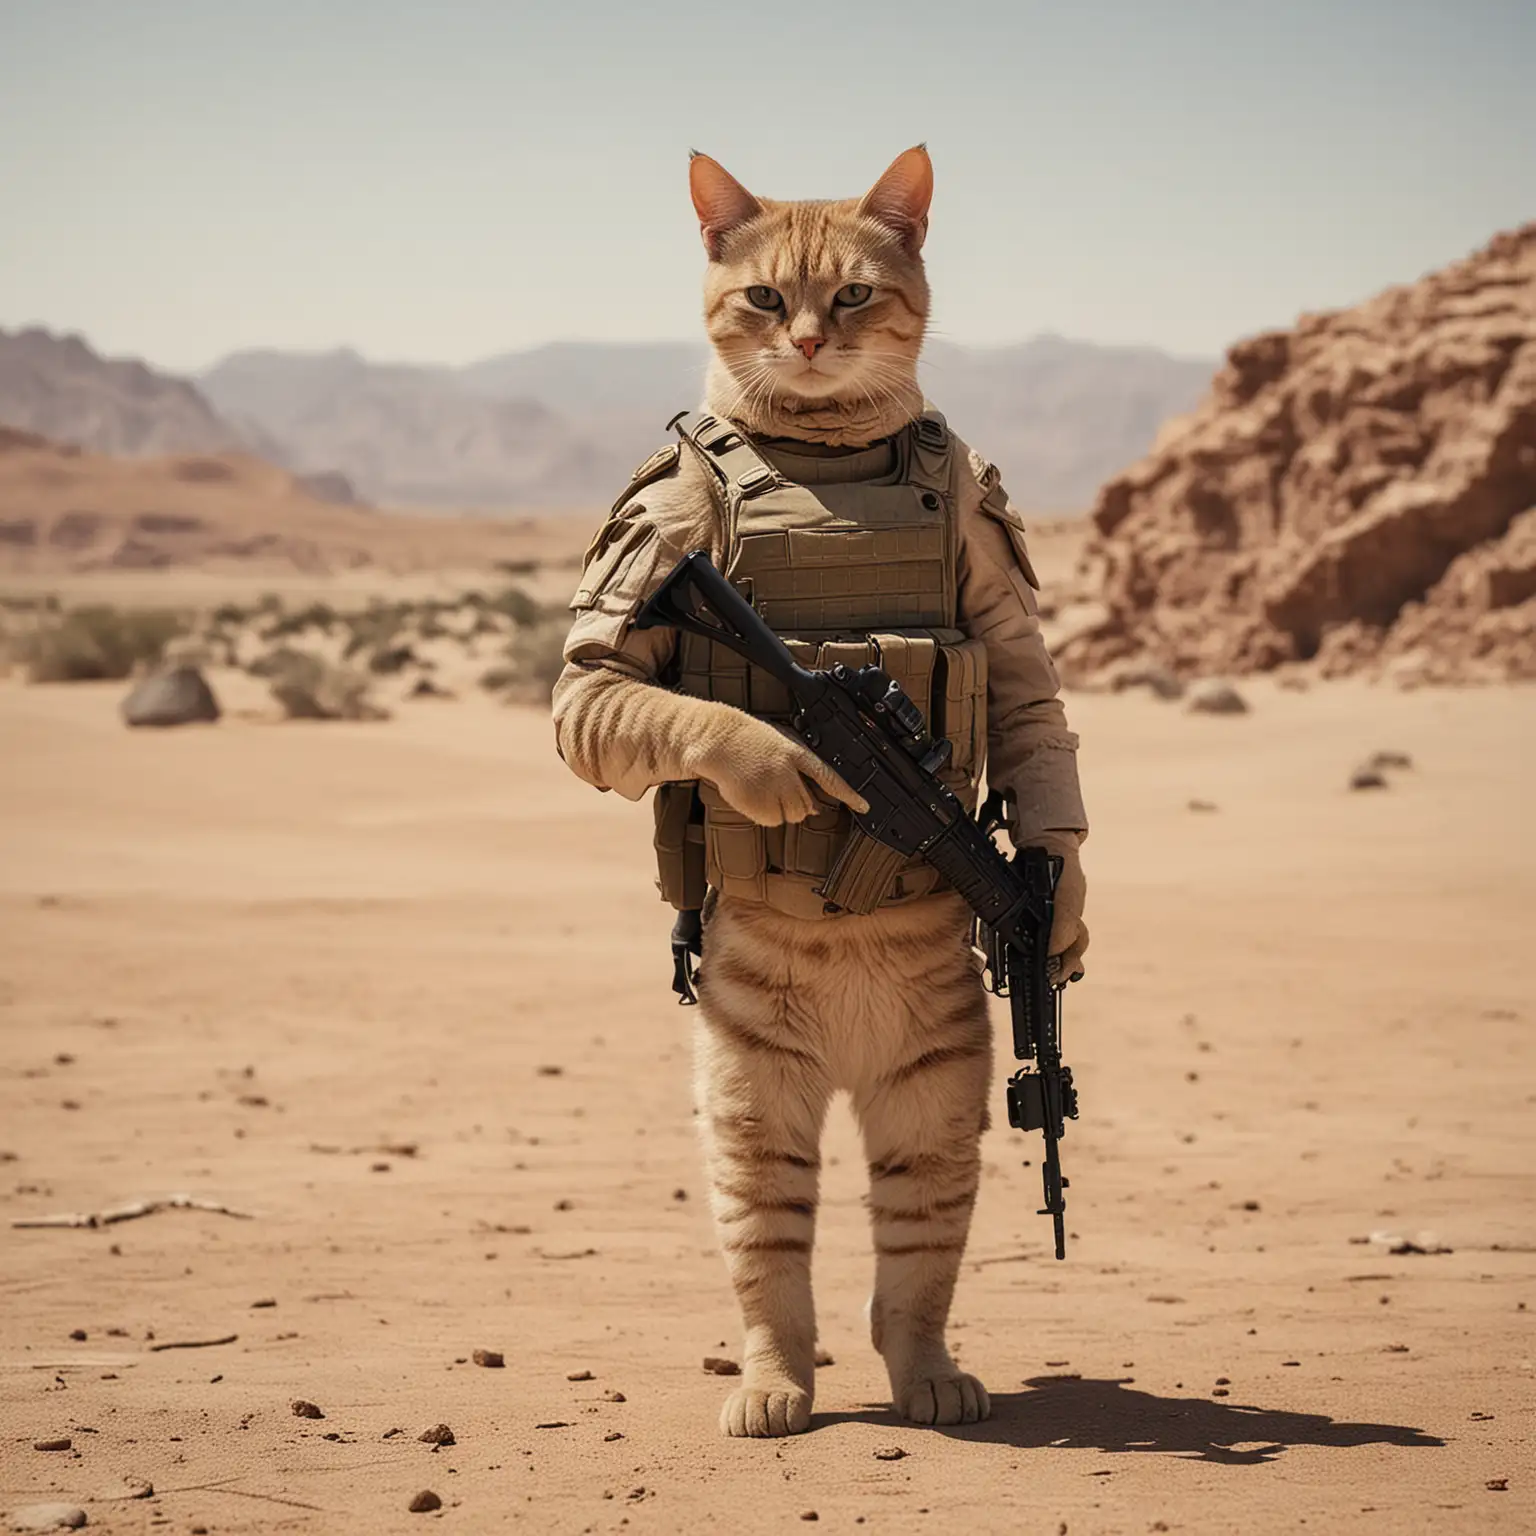 A cat with a body of a human soldier standing in The desert